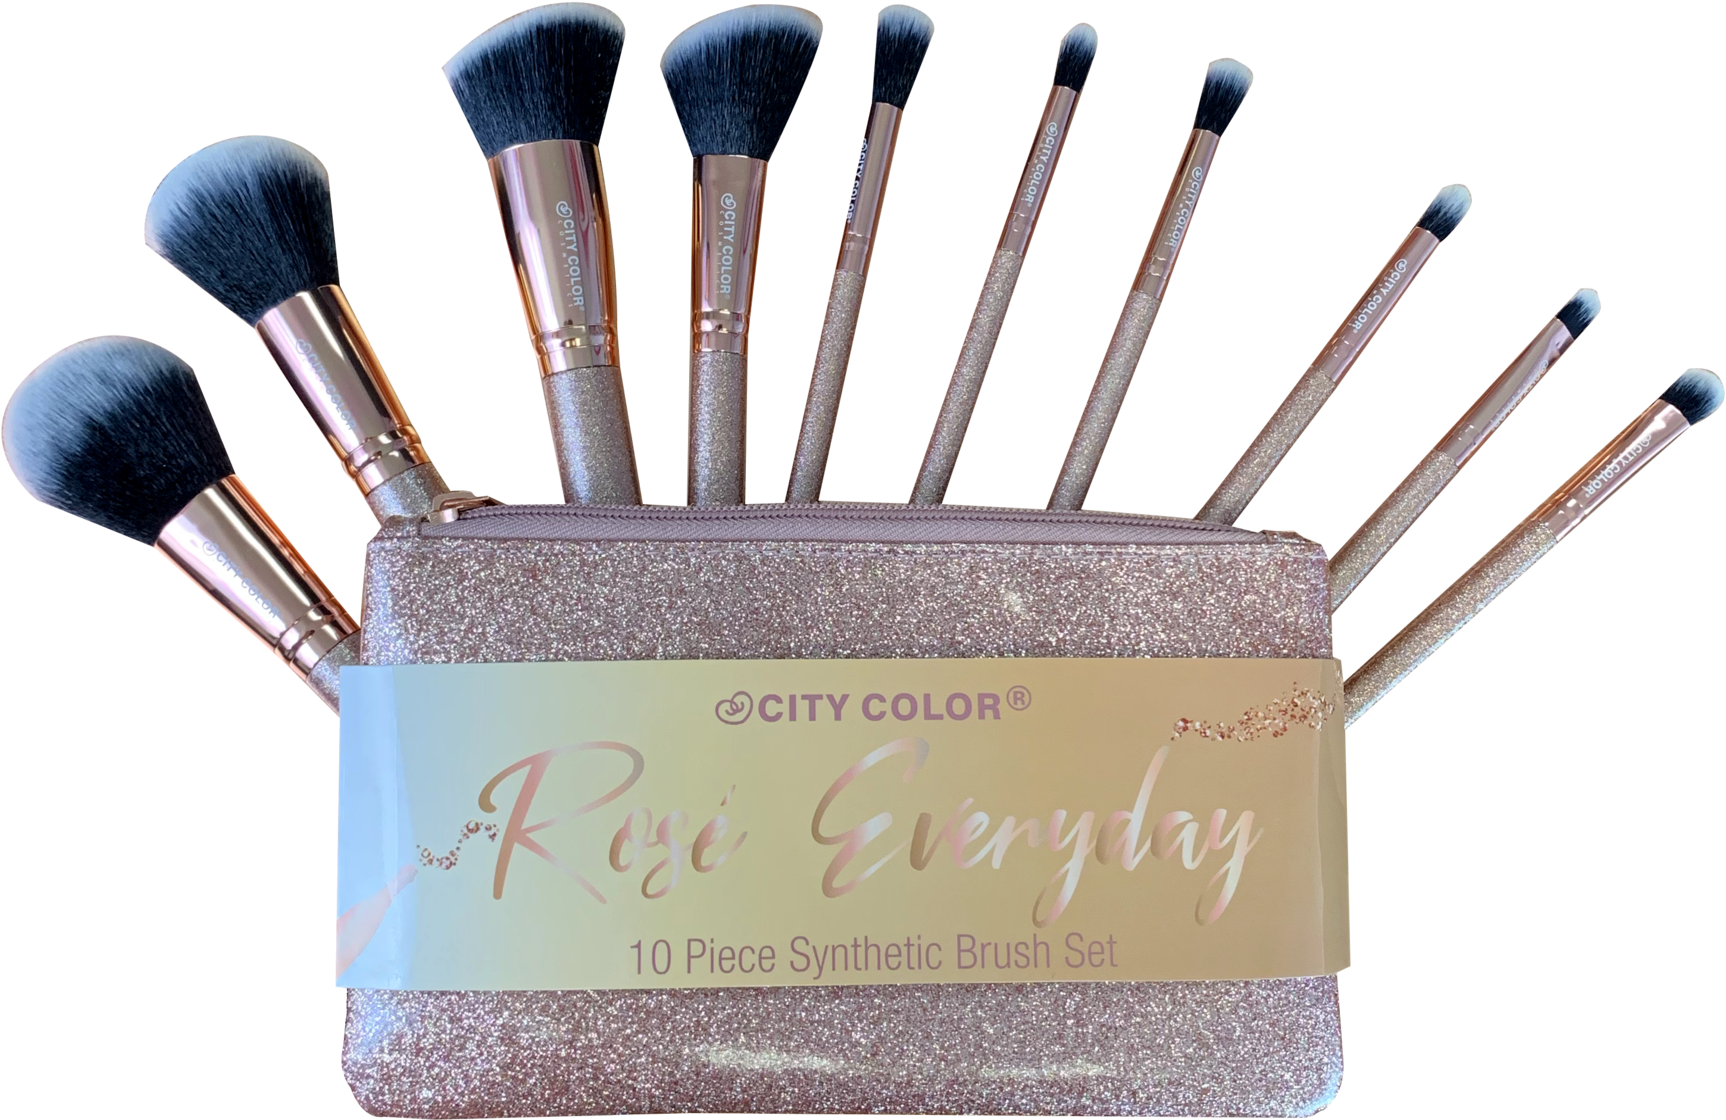 City Color10 Piece Synthetic Brush Set PNG image